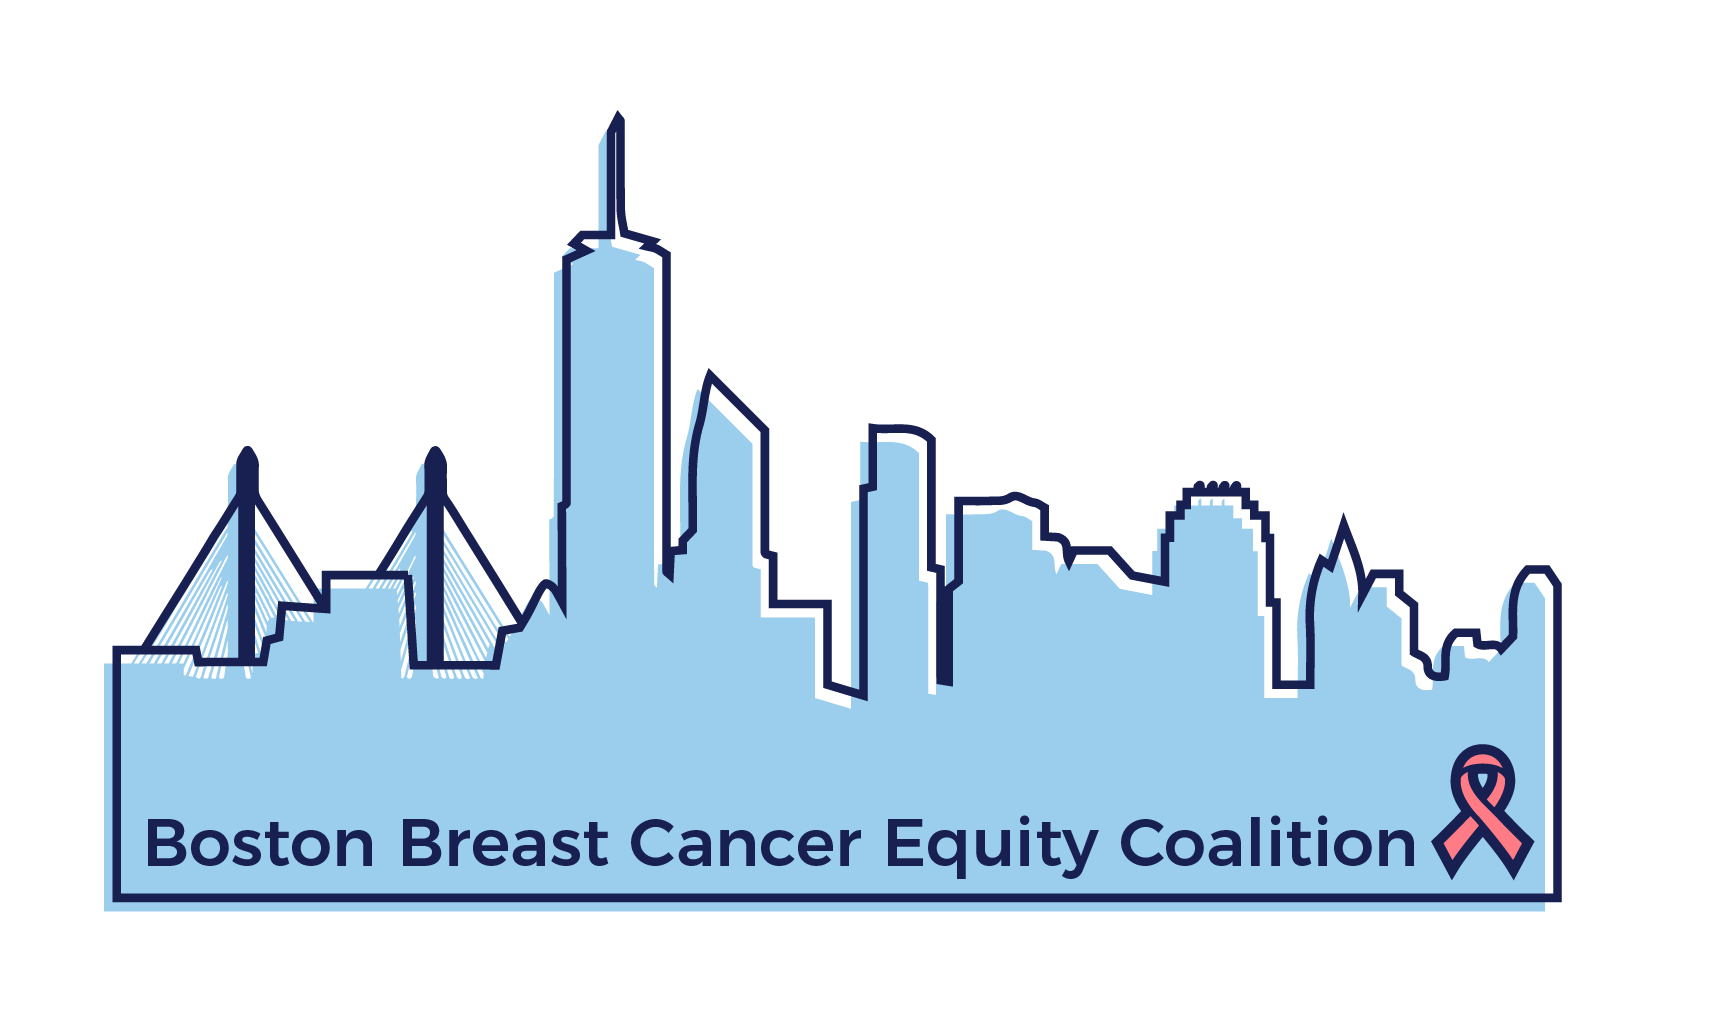 Boston Breast Cancer Equity Coalition